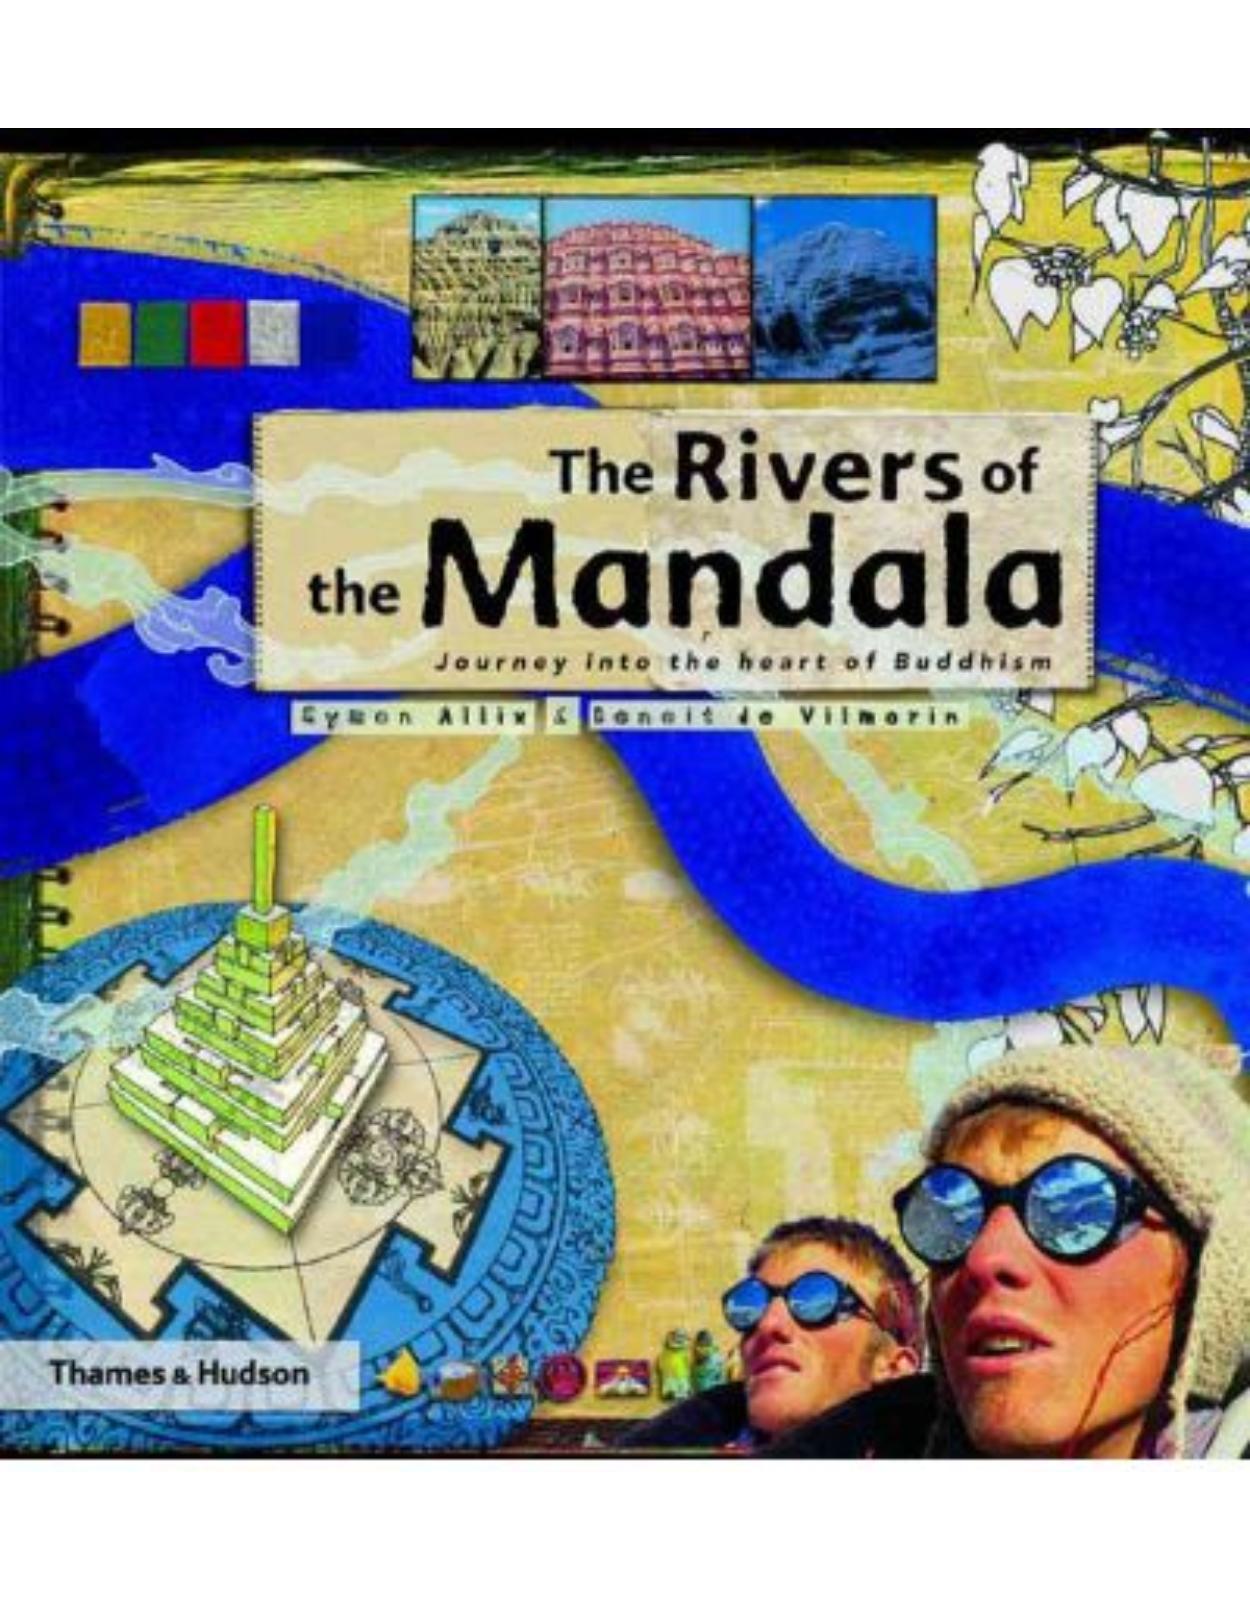 The Rivers of the Mandala: Journey into the Heart of Buddhism